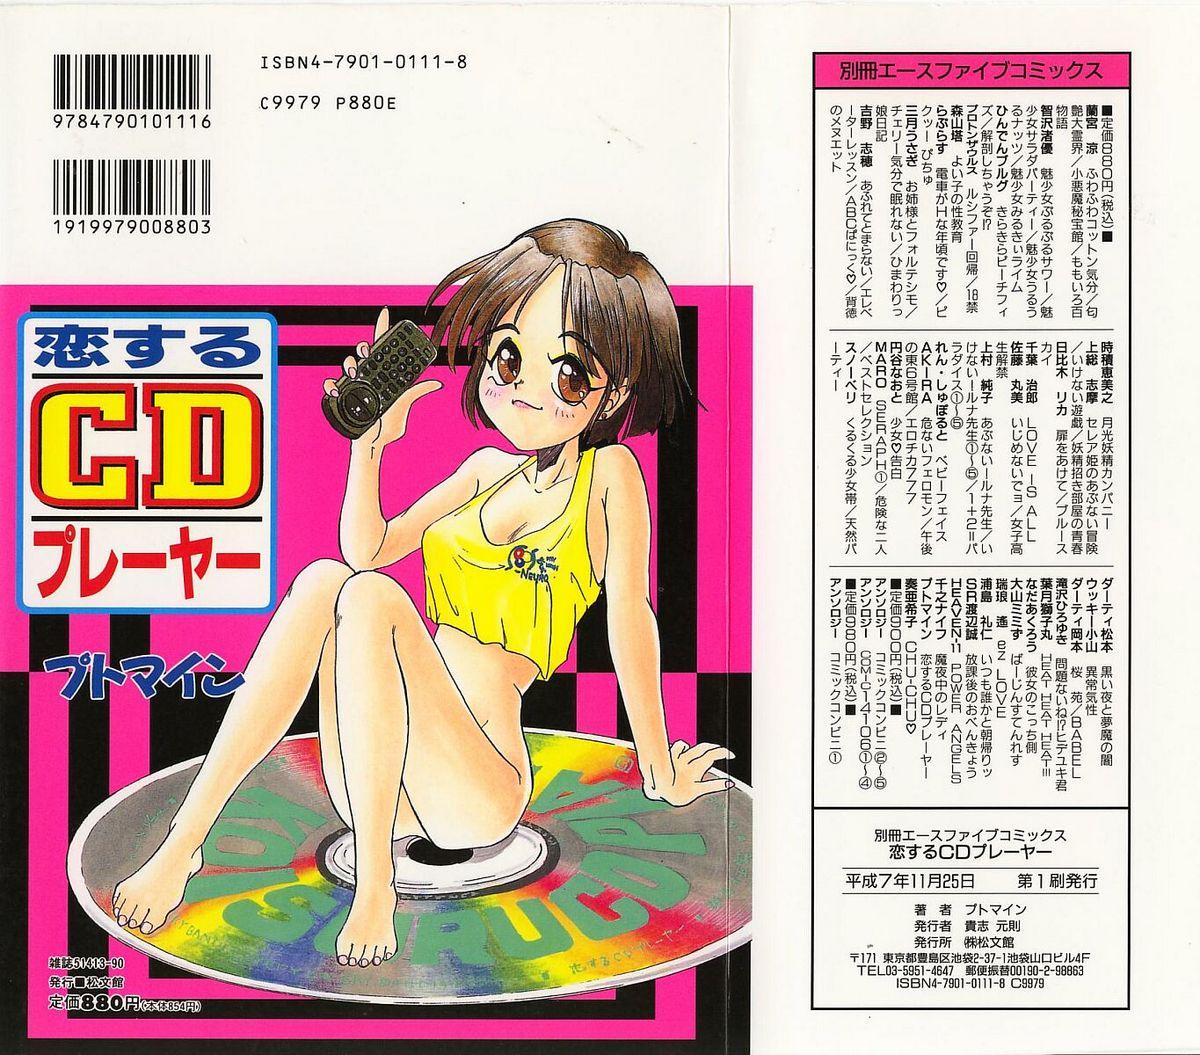 Amature Sex Tapes Koisuru CD Player Hot Girl - Page 153